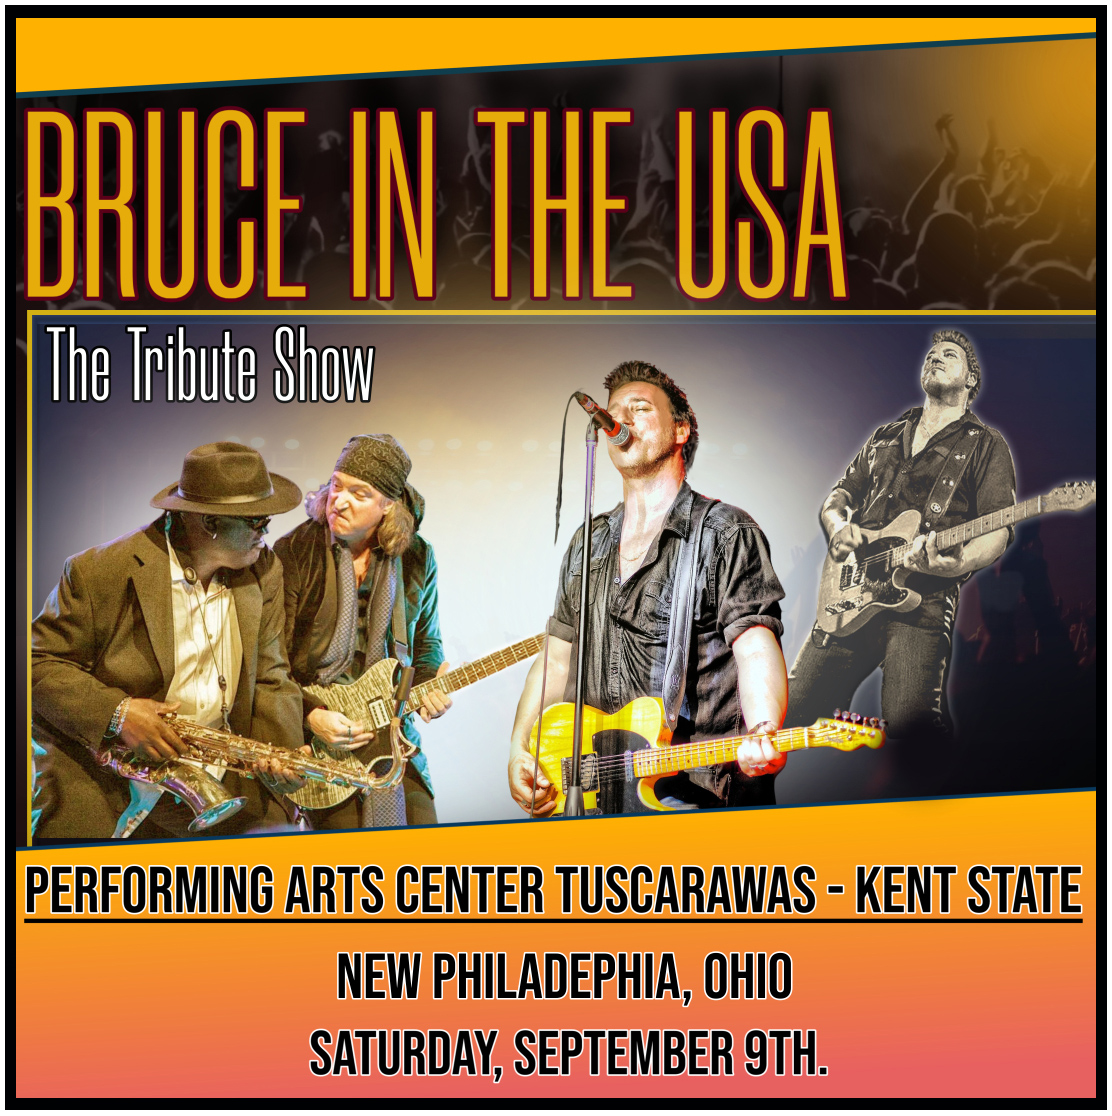 BRUCE IN THE USA - The Bruce Springsteen Tribute Show will be performing at THE PERFORMING ARTS CENTER TUSCARAWAS - KENT STATE. New Philadelphia, Ohio. Saturday, September 9th. - 7:30 PM show. Find out more... kent.edu/tuscpac